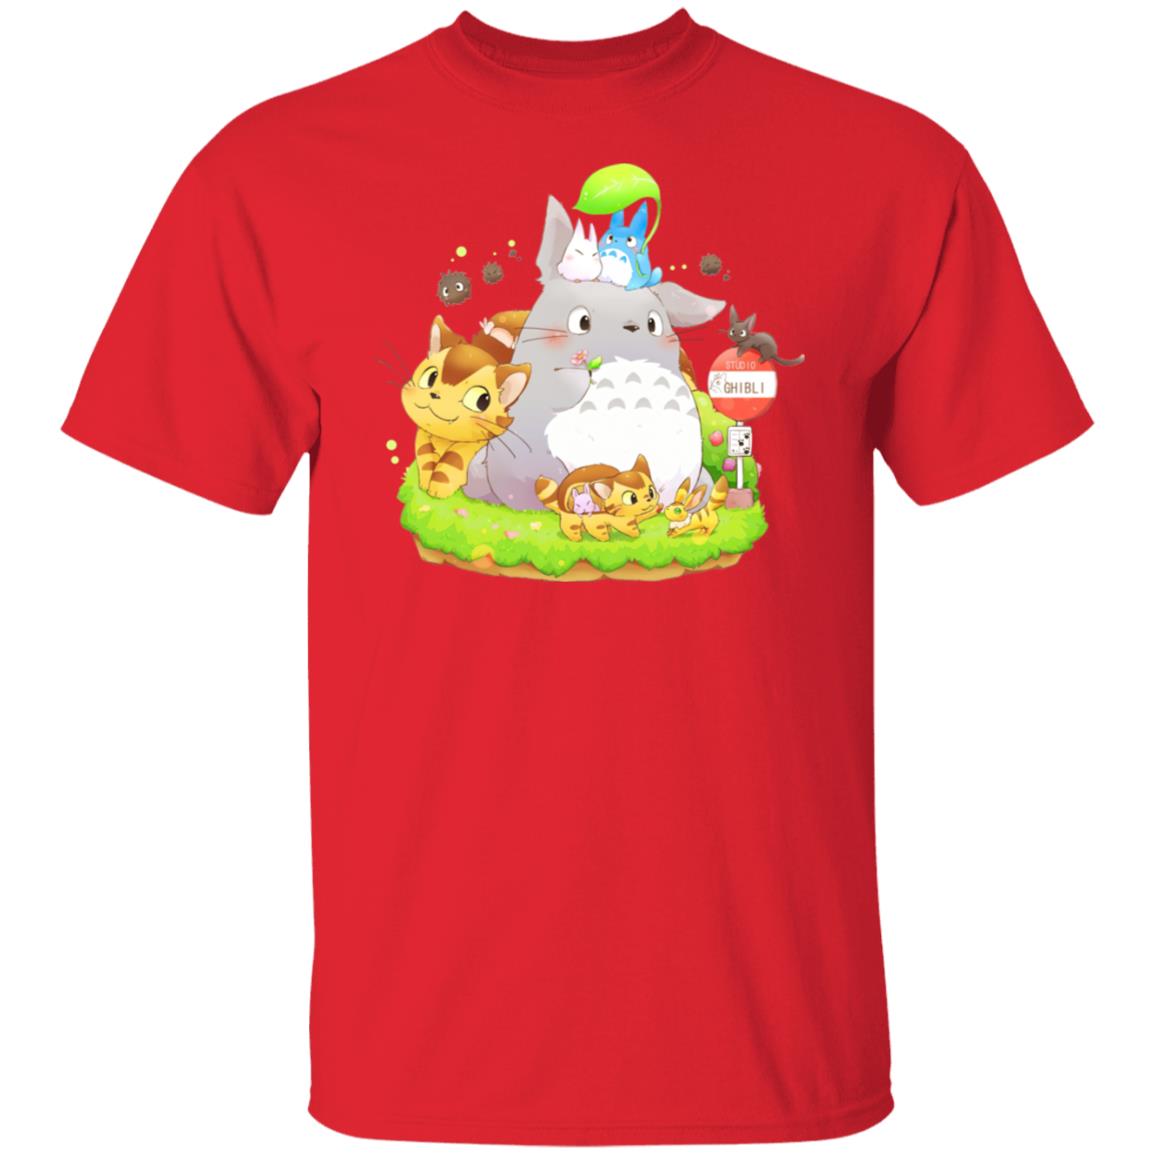 Totoro Family and The Cat Bus T shirt